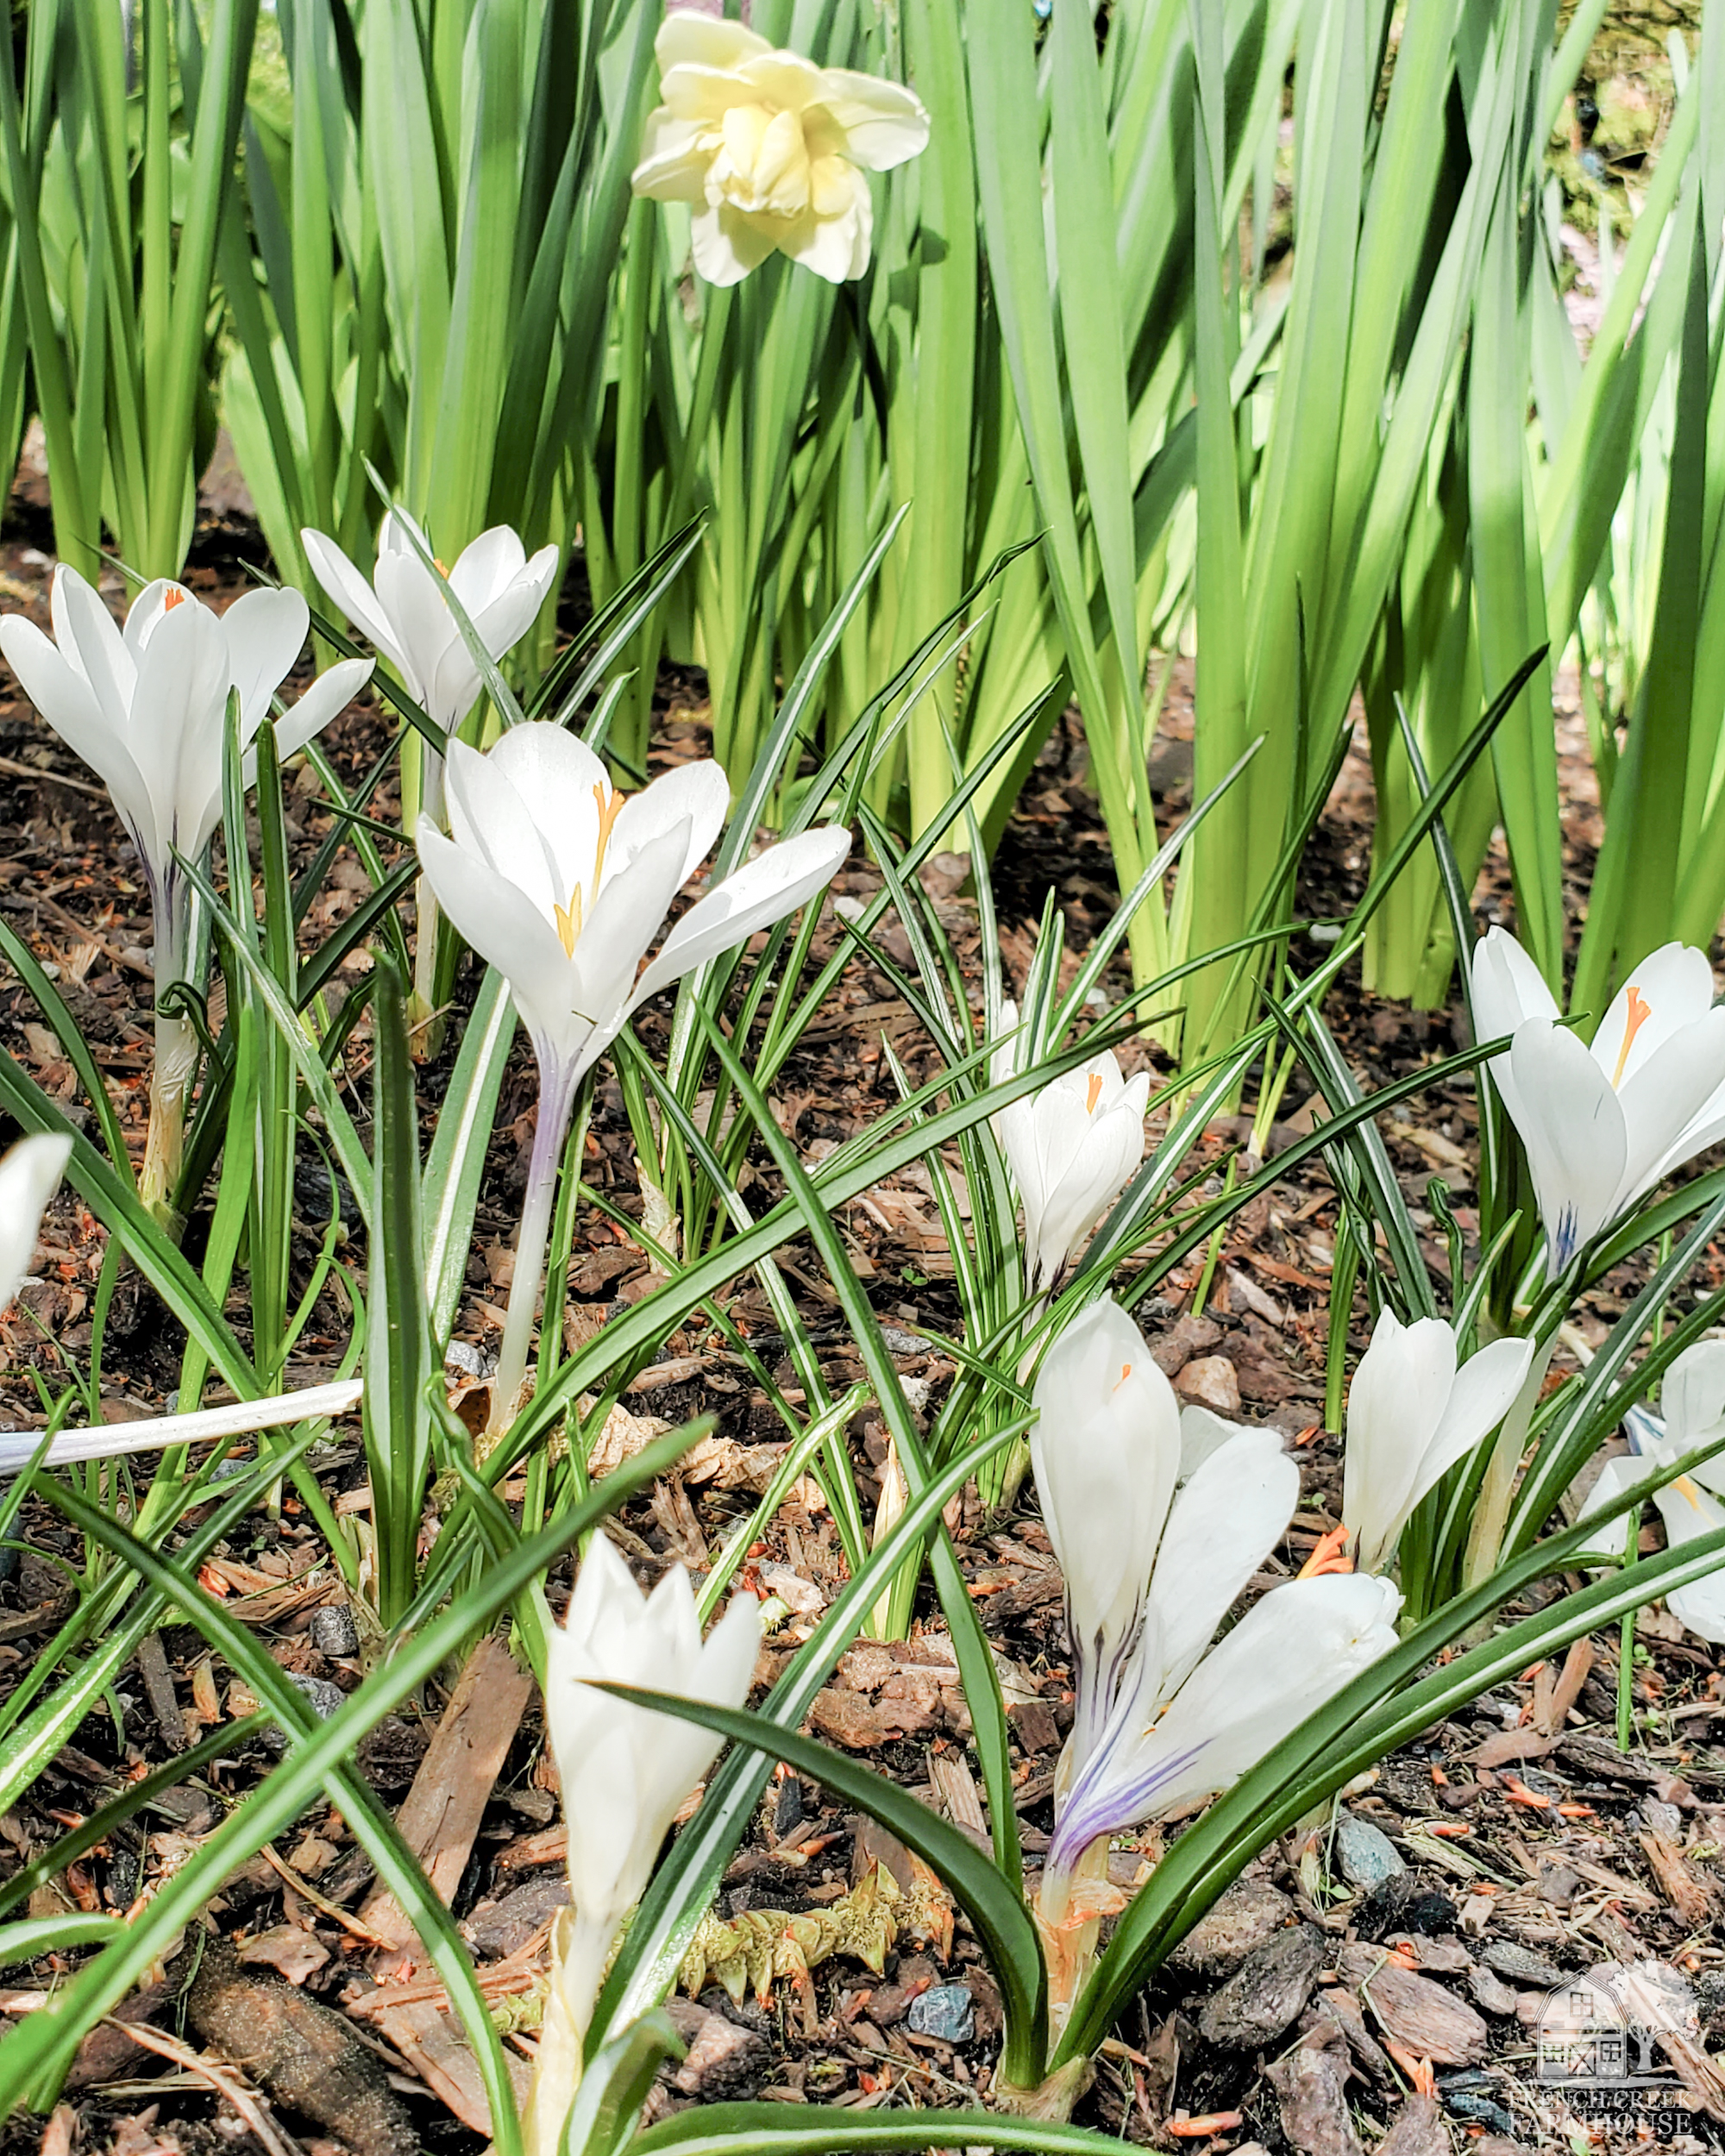 Jeanne d'Arc Giant Crocus are in bloom